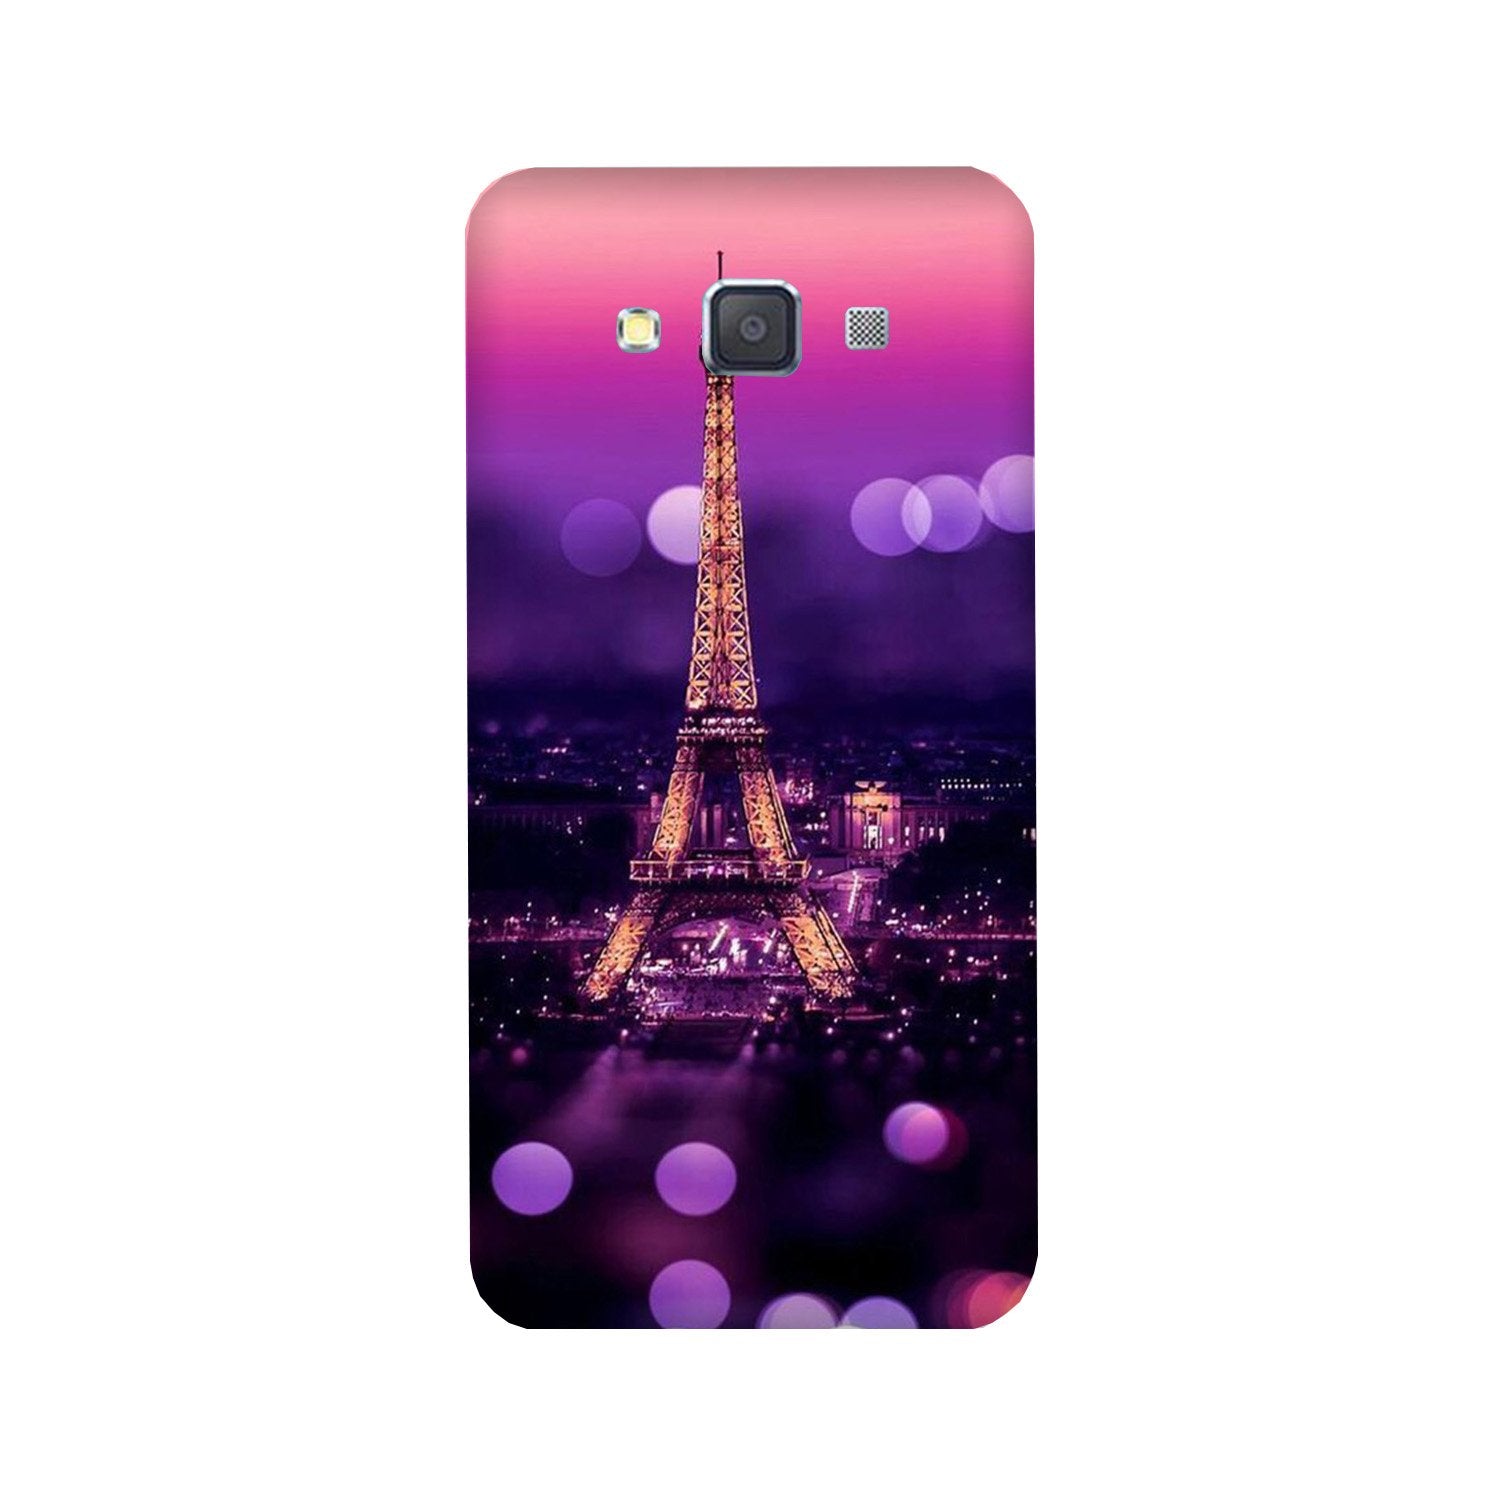 Eiffel Tower Case for Galaxy ON7/ON7 Pro